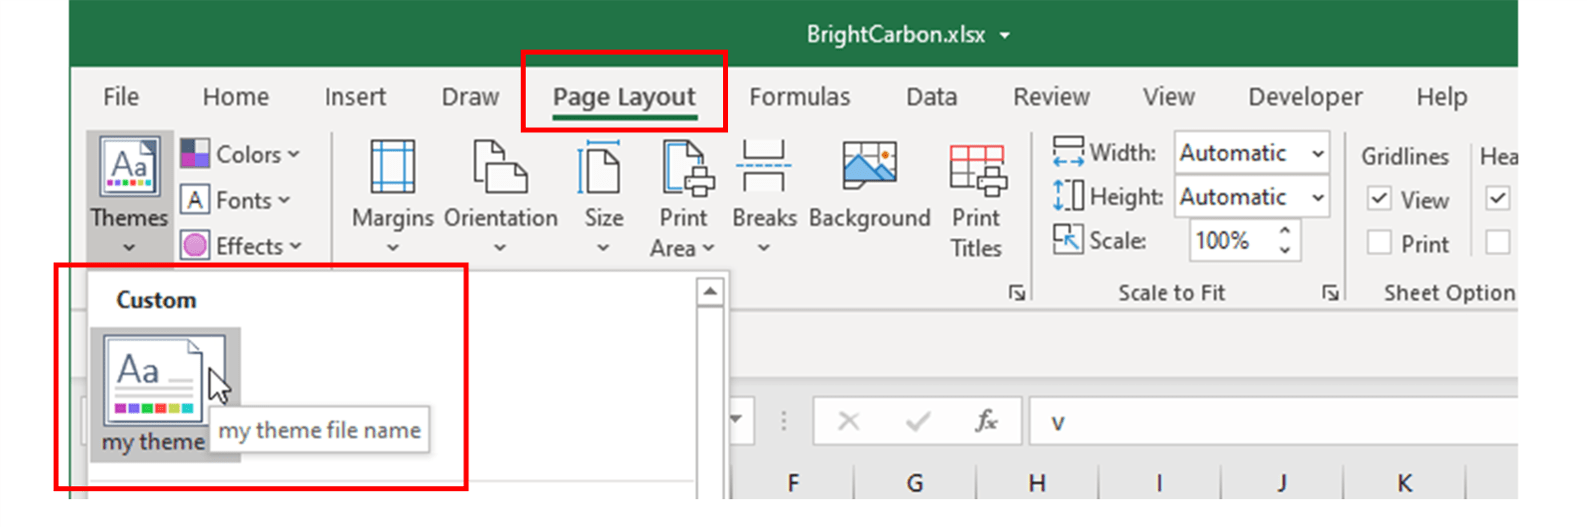 Screenshot showing where to locate a custom Office theme in Excel